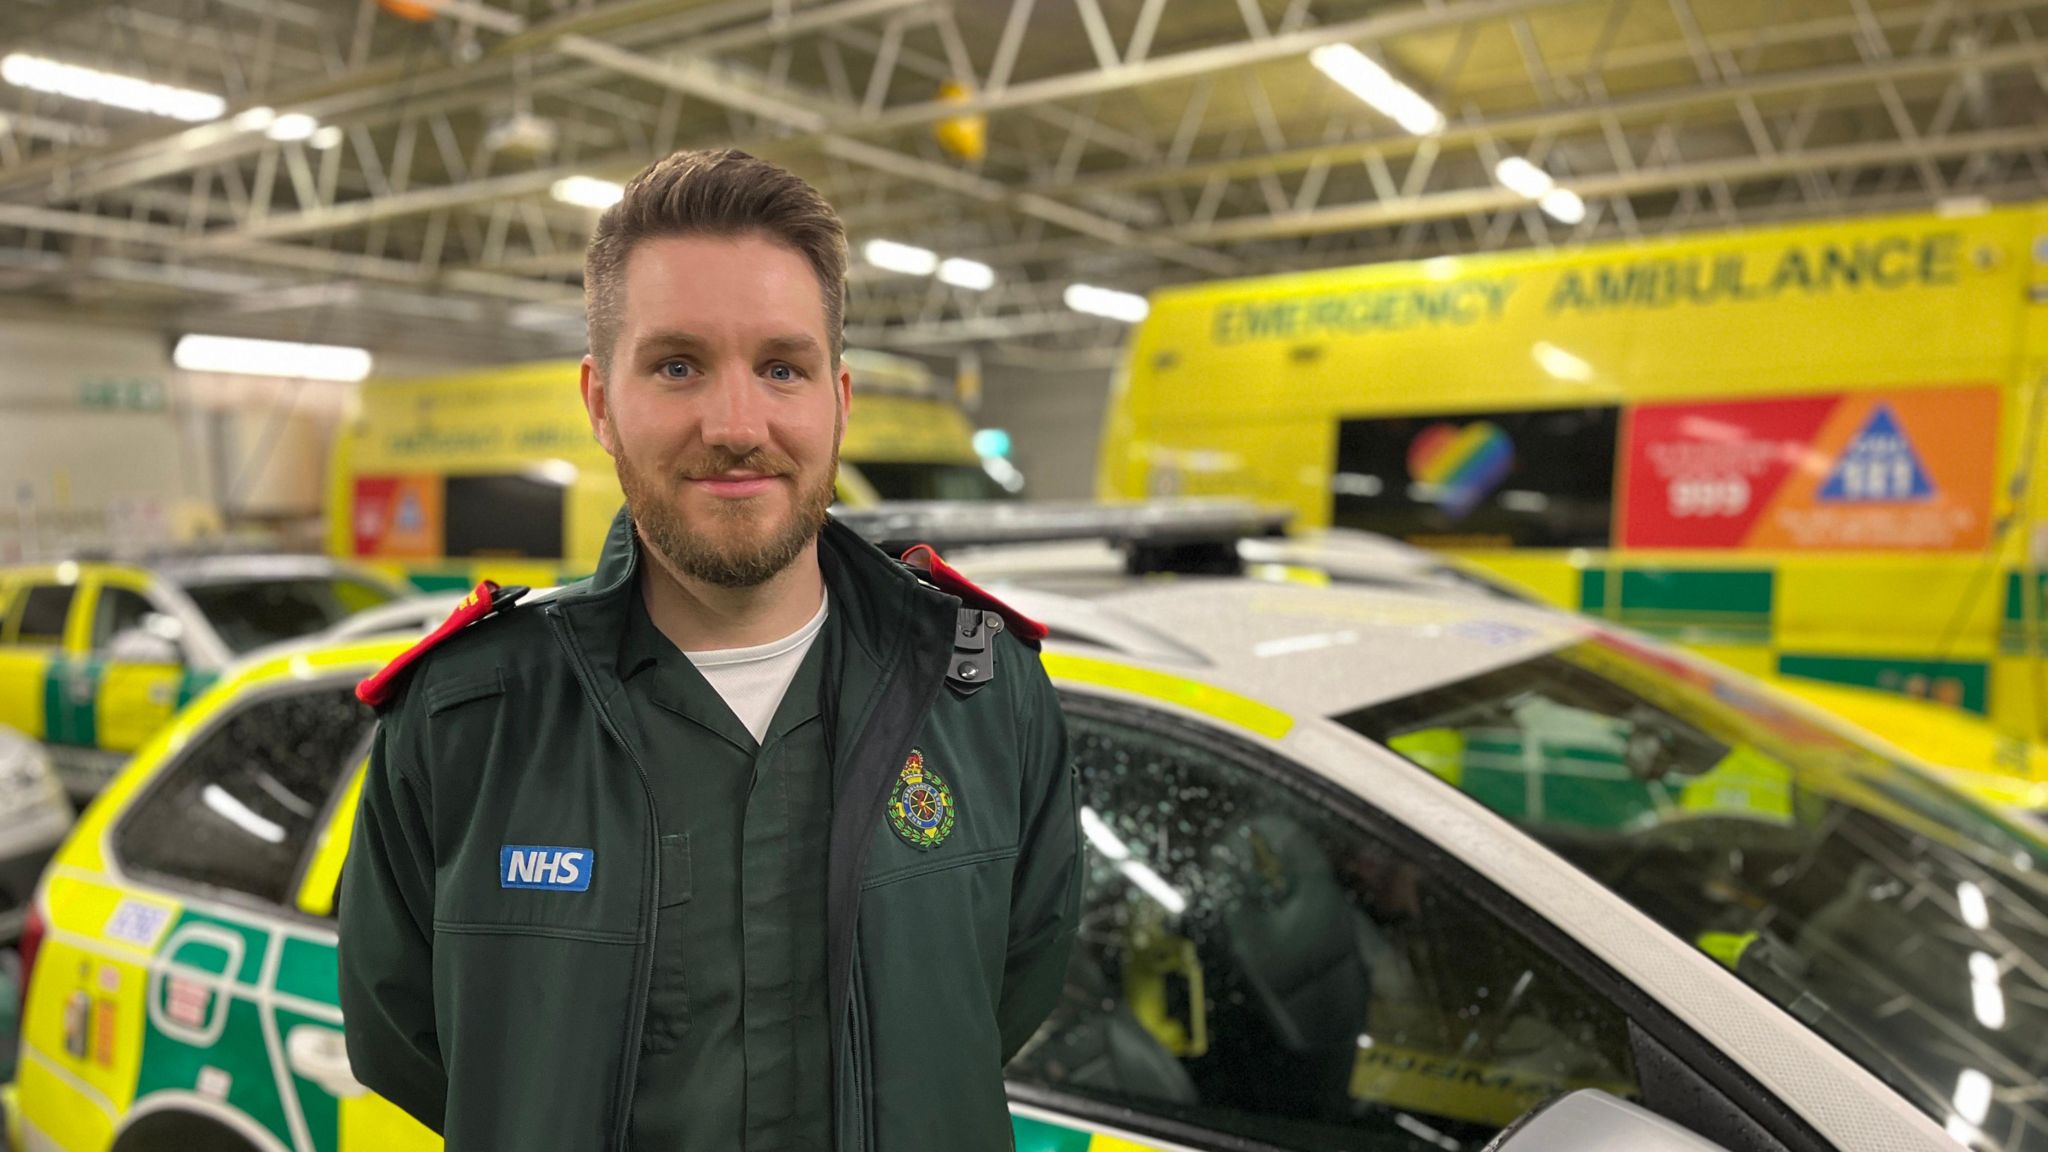 Paramedic Jon Hall stands in front of ambulance vehicles